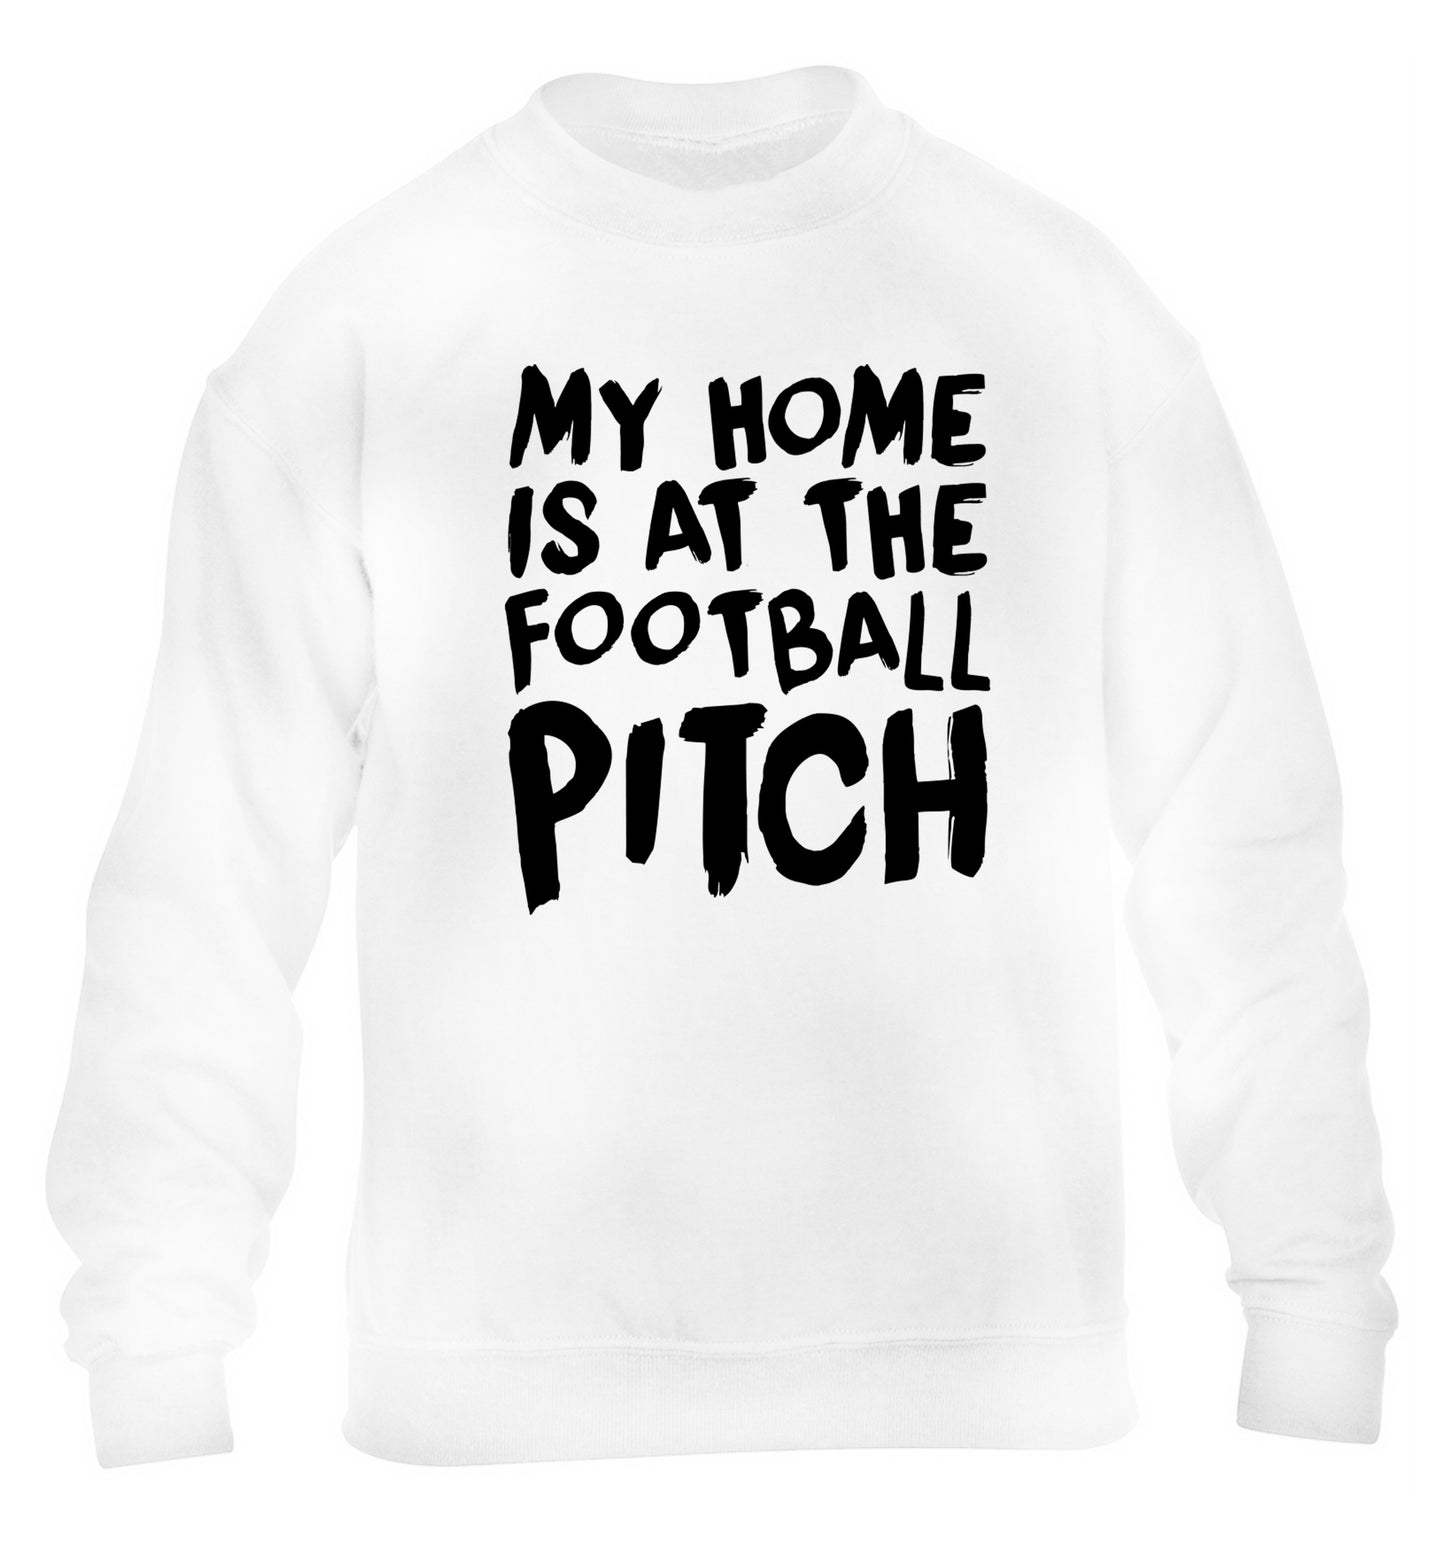 My home is at the football pitch children's white sweater 12-14 Years